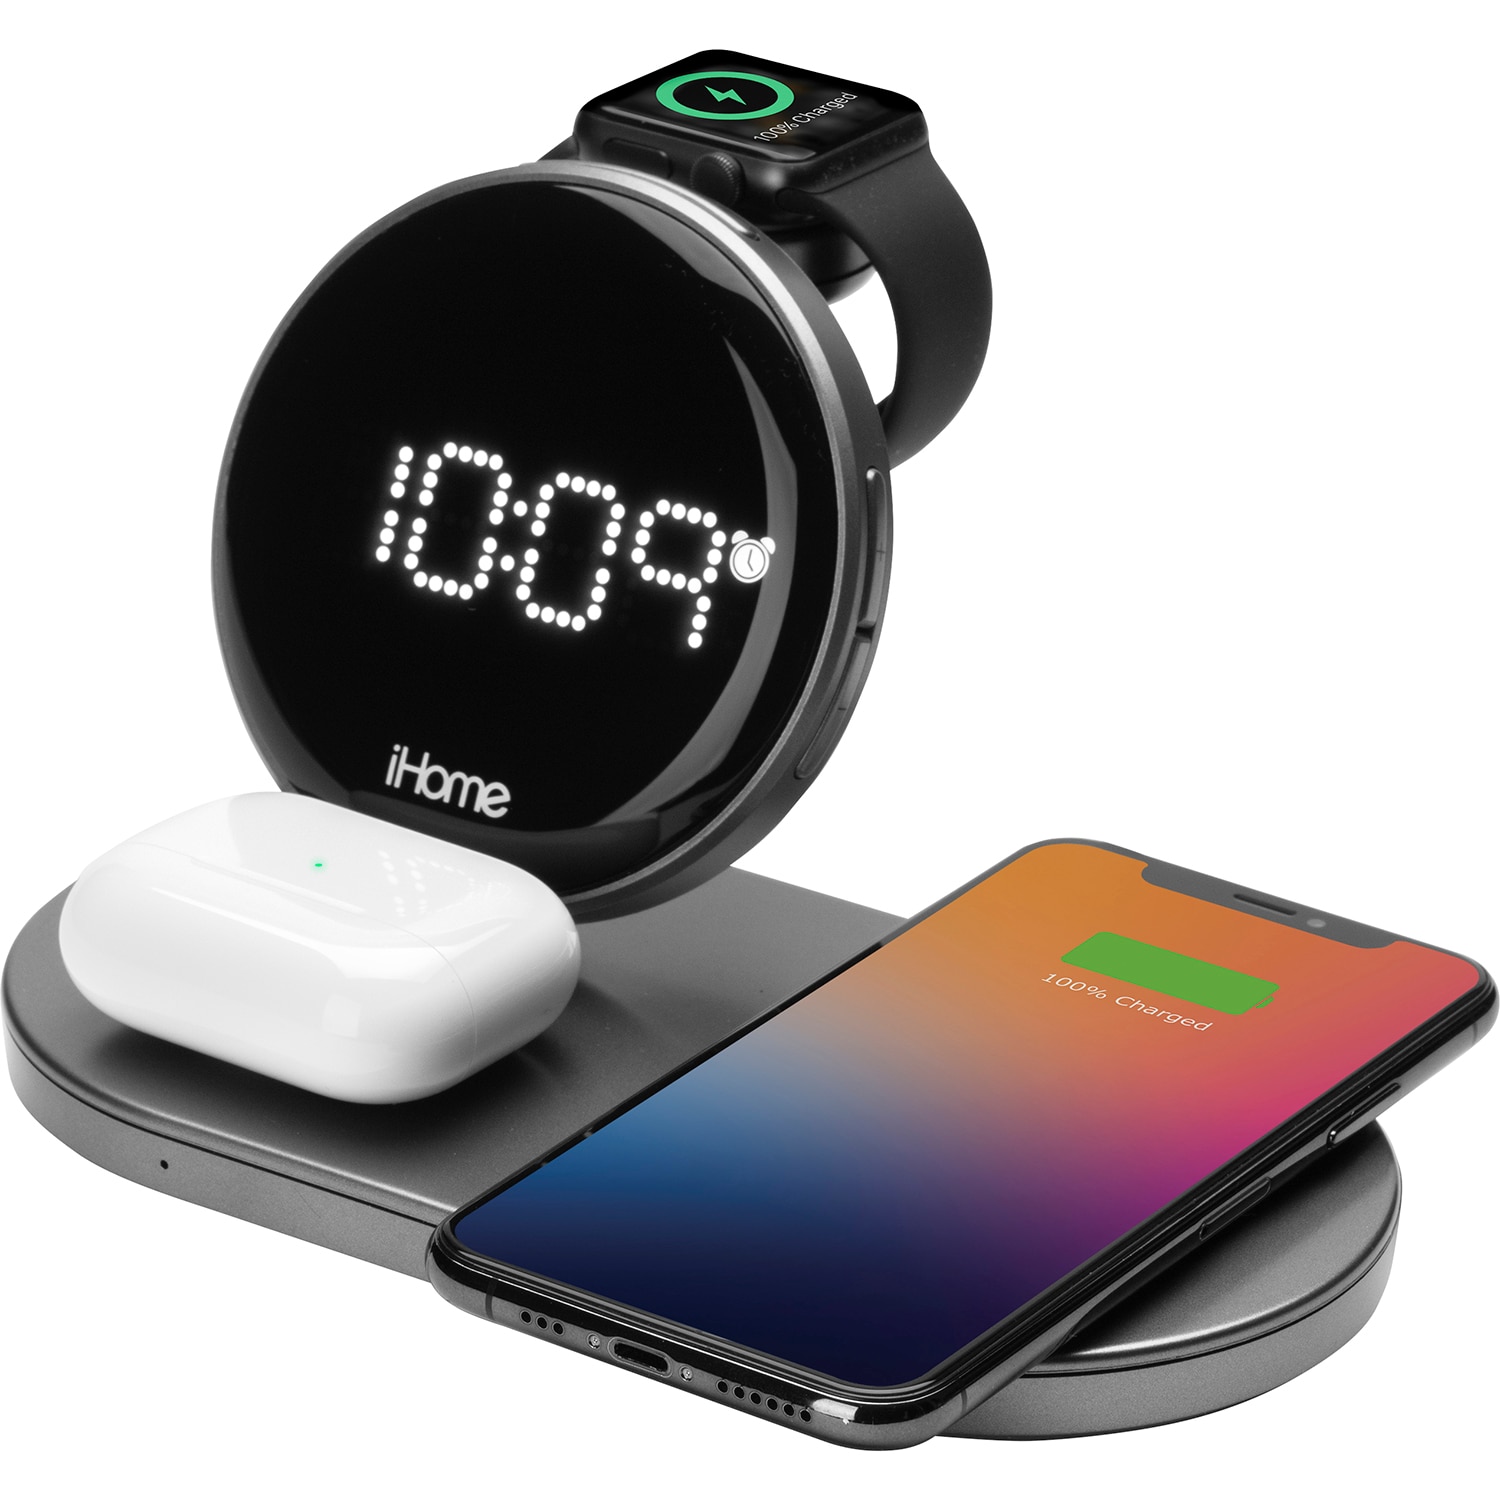 iHome PowerValet Quad+ Alarm Clock with Wireless Charging